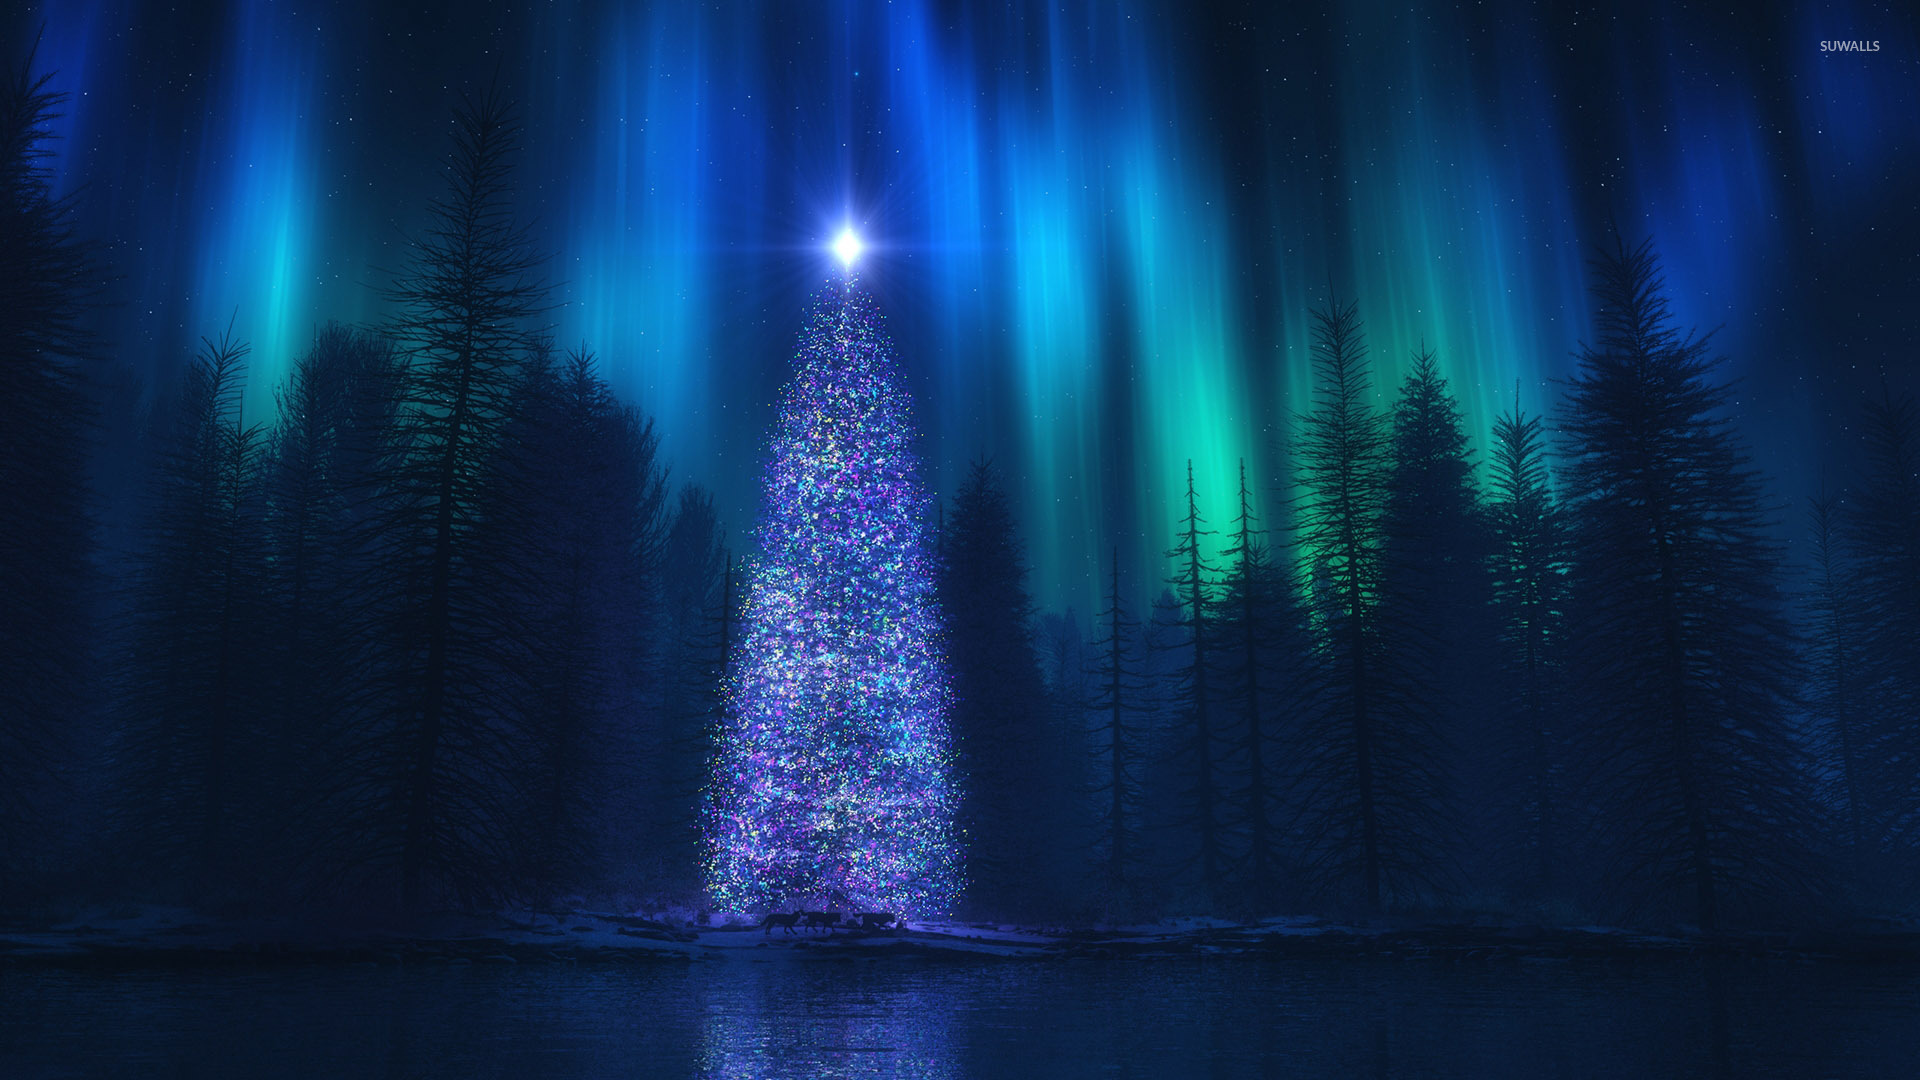 Christmas tree in the forest wallpaper - Holiday wallpapers - #34492